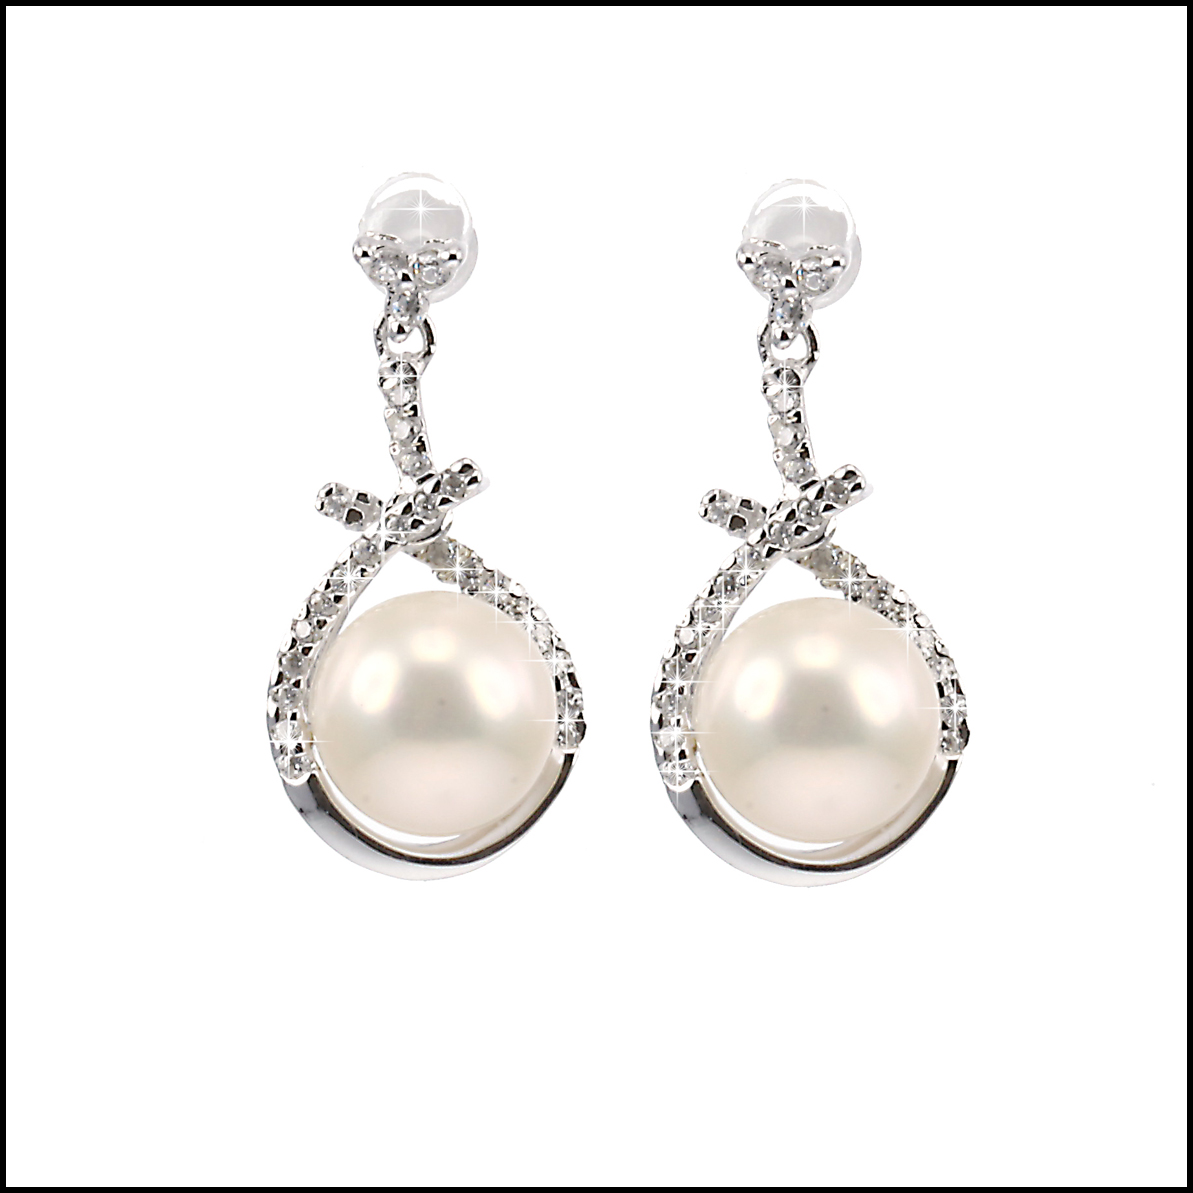 C16E - Sterling Silver Earrings with white freshwater pearls - Lido ...